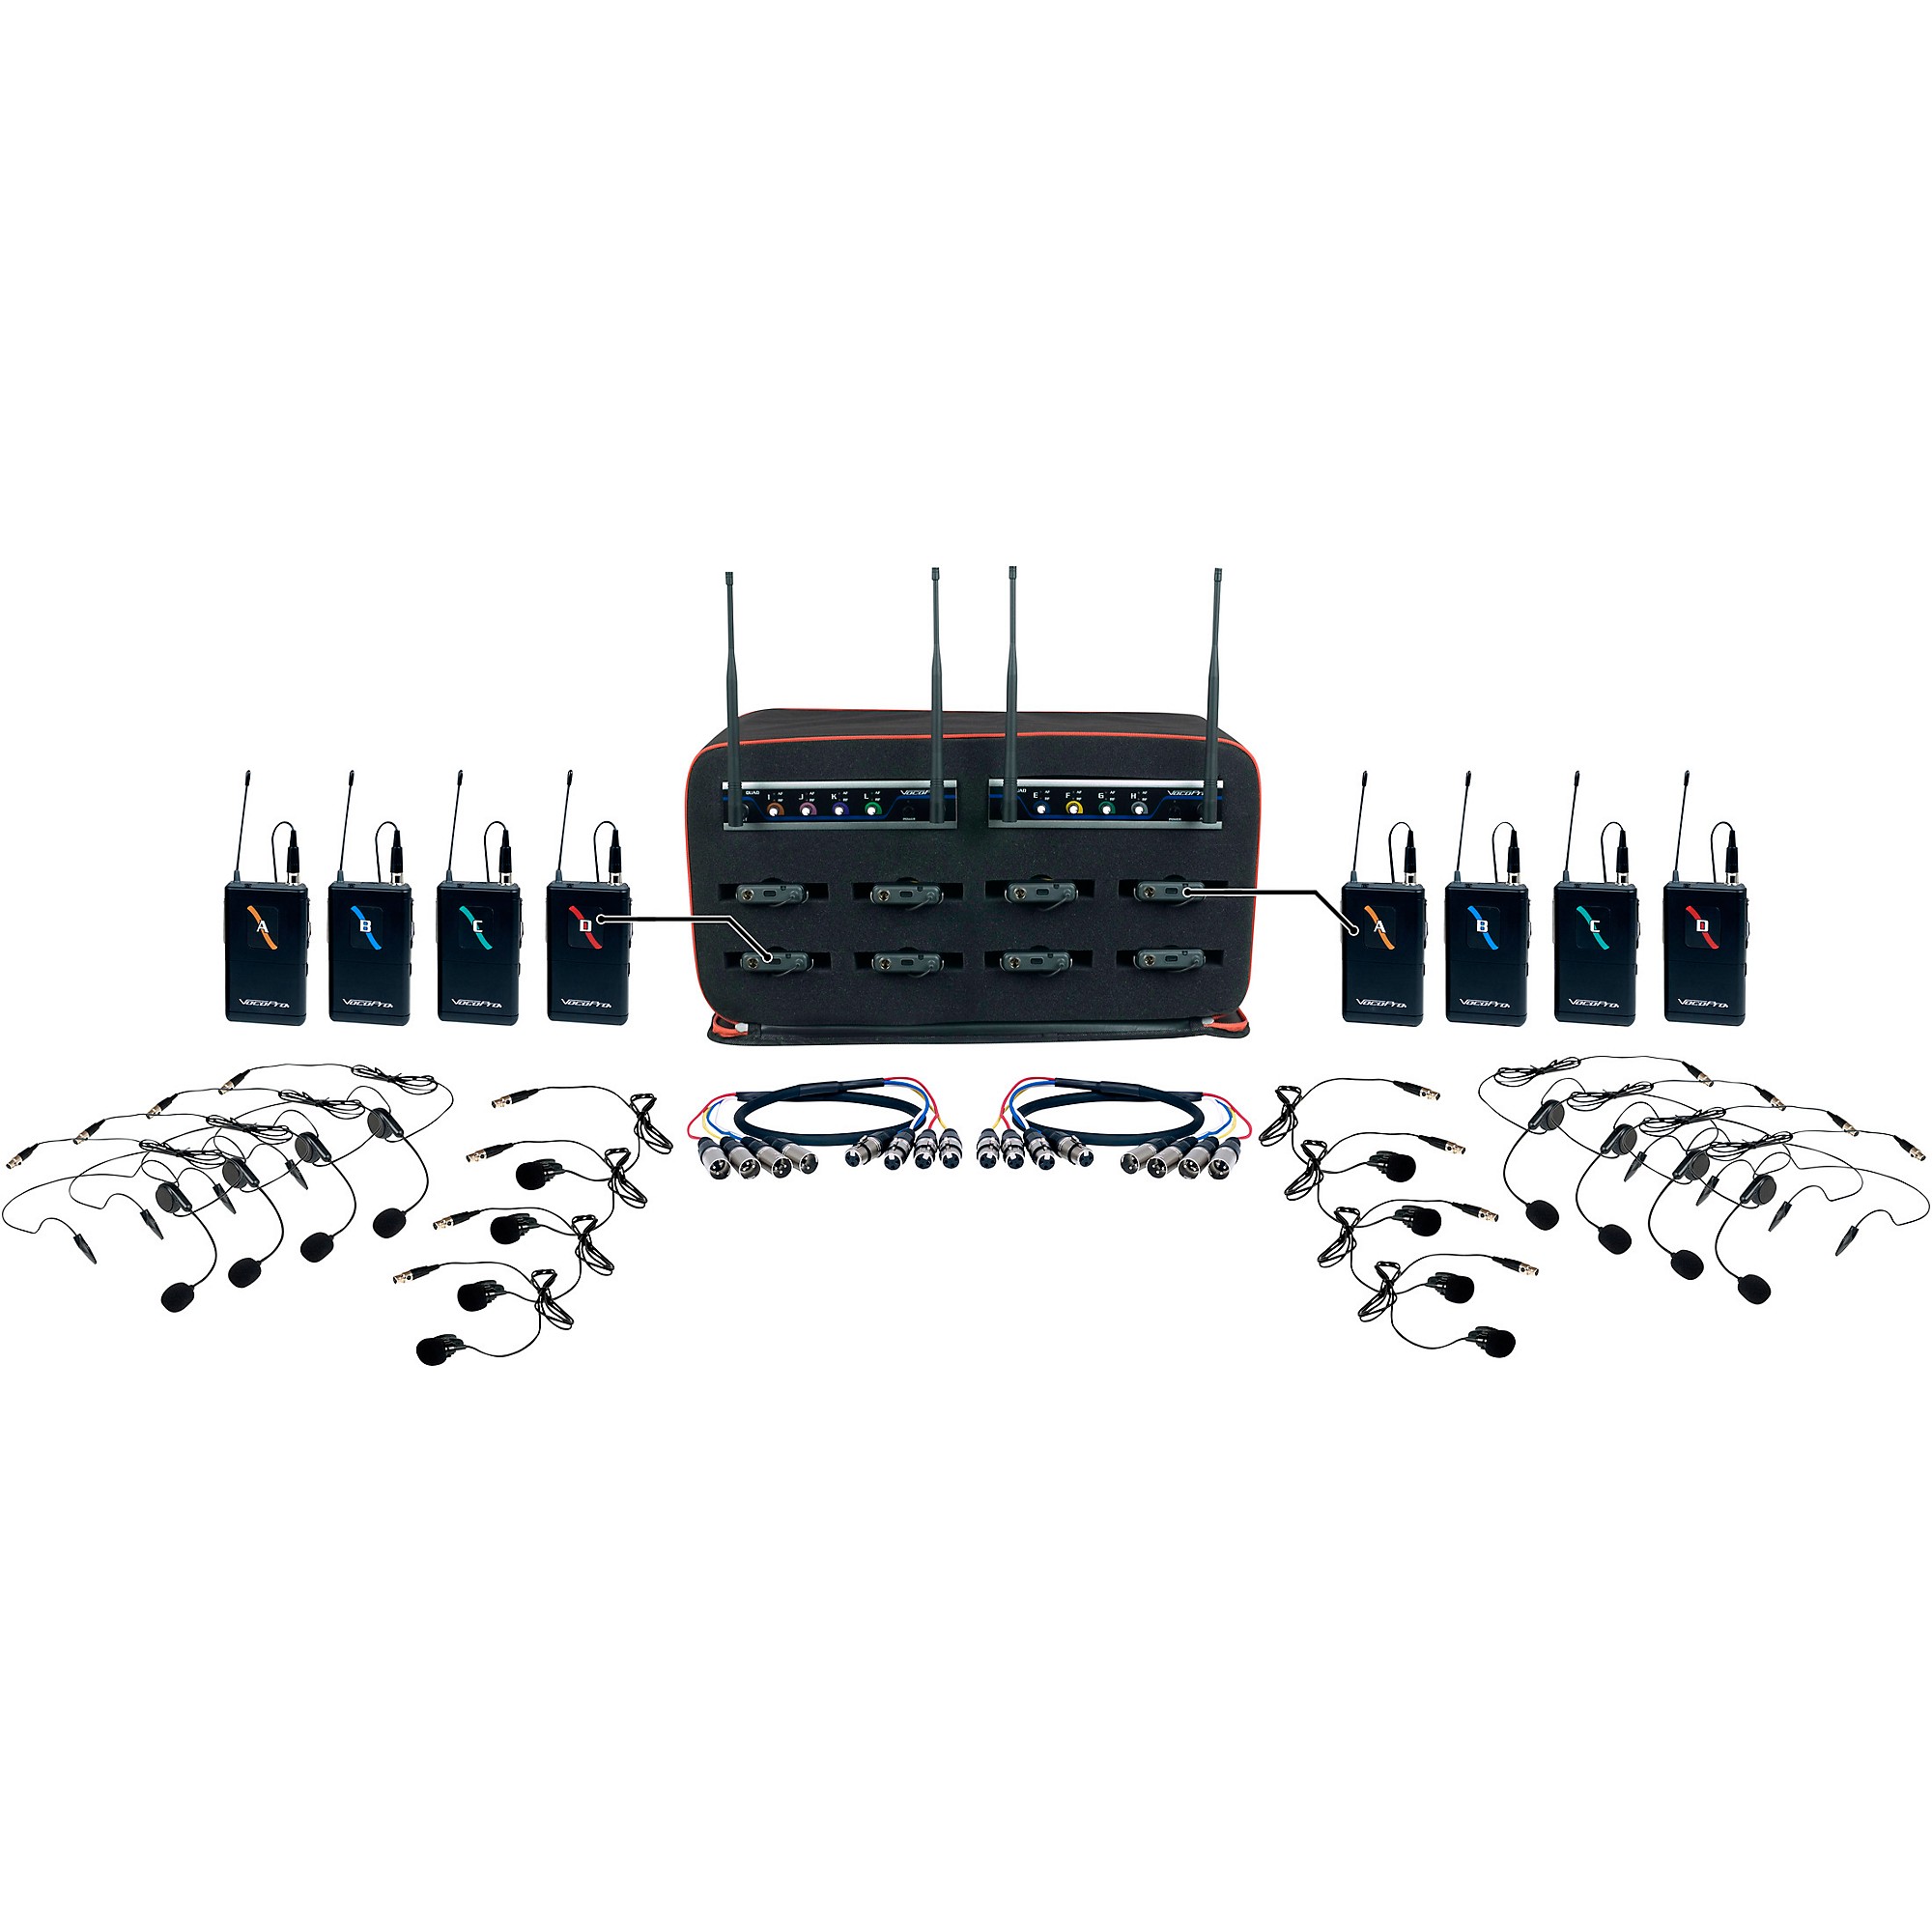 Package,　Mic-in-Bag　VocoPro　MIB-QUAD-8B　Center　SYSTEM　Wireless　8-Channel　Headset/Lapel　900-927.2mHz　Guitar